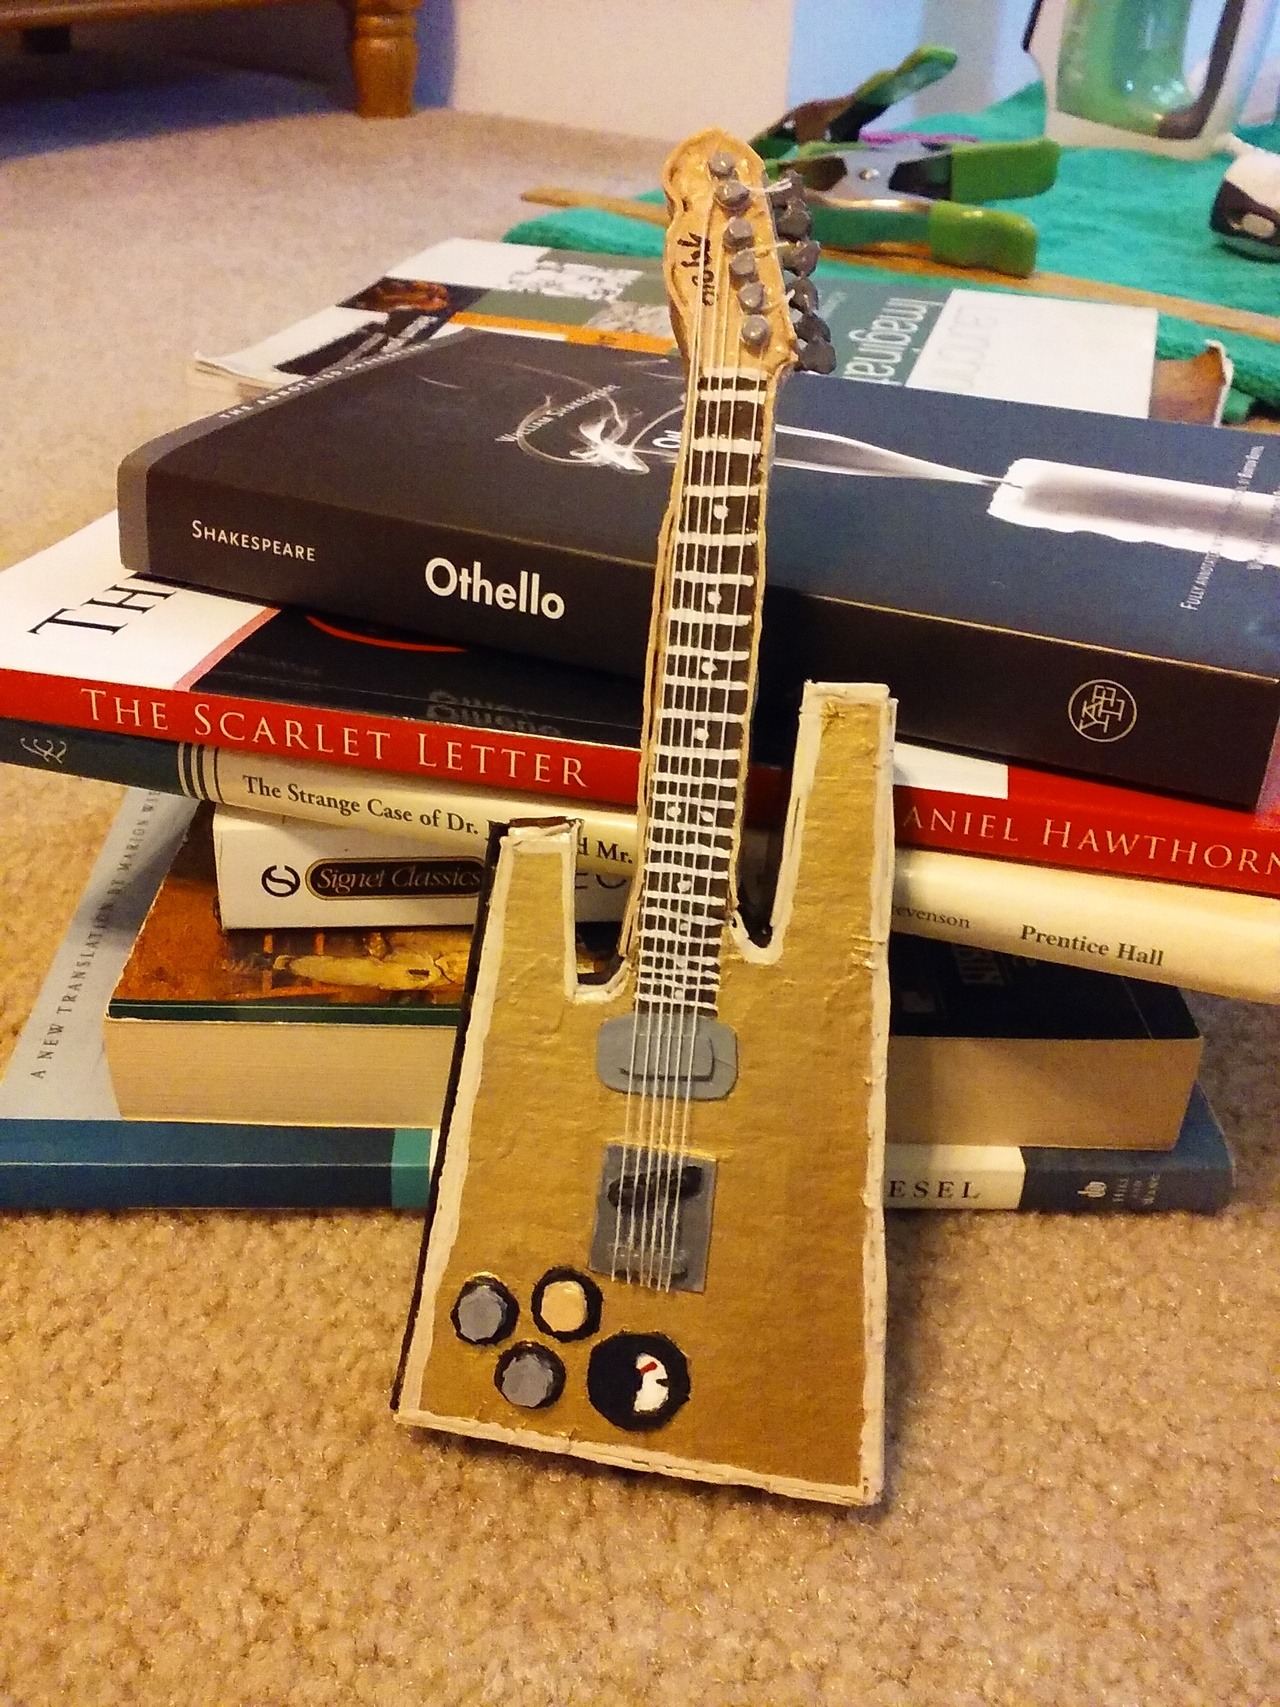 The final cardboard miniature Chessmaster. It is a golden guitar with a wooden neck. There are some knobs in the corner of the body and also has some sort of dial. It is leaning against a stack of books.